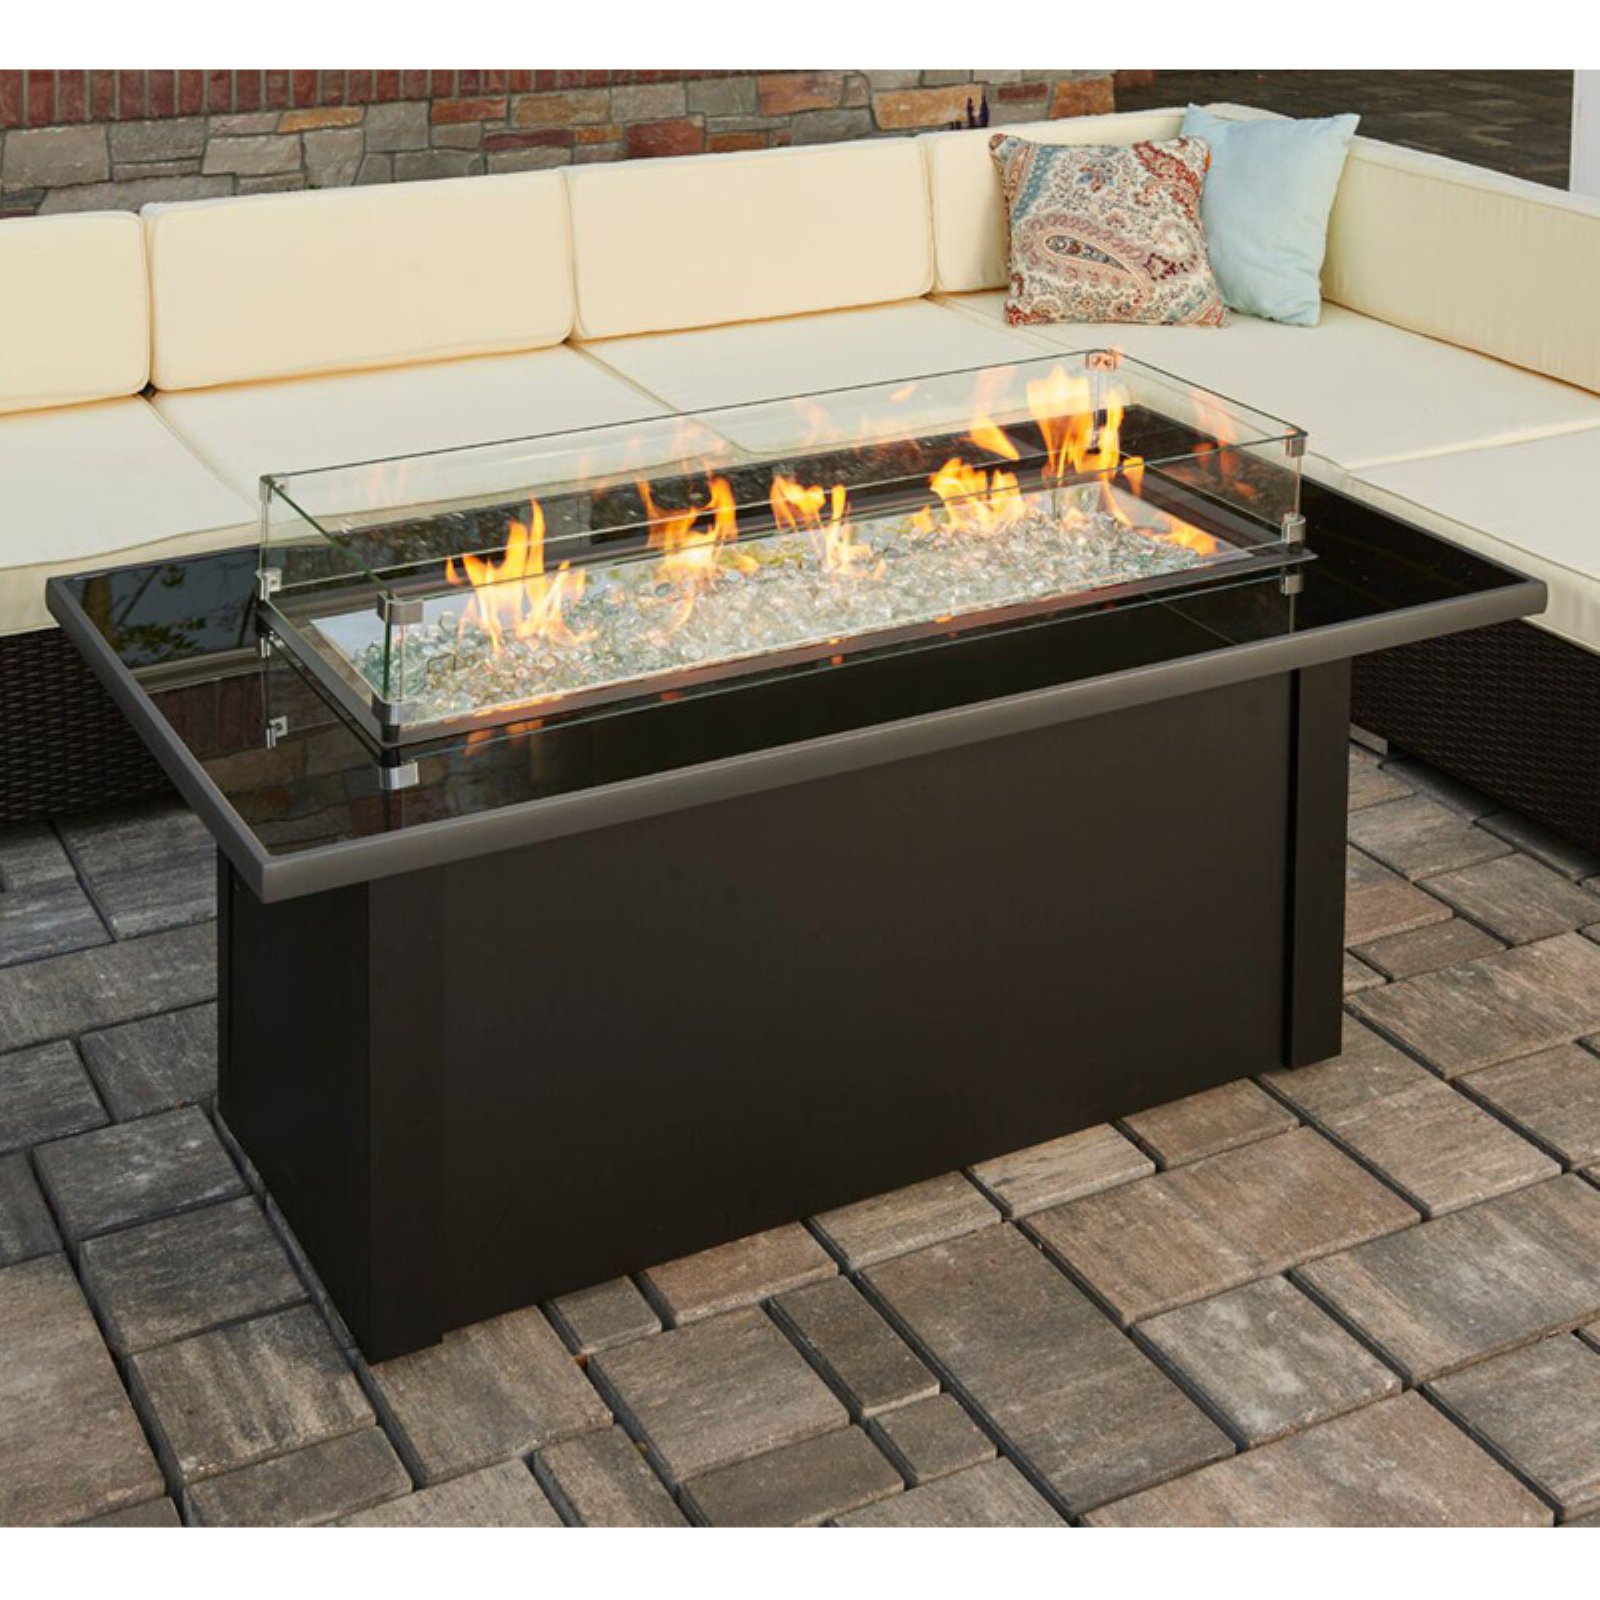 Fireplace Door Cover Fresh Outdoor Greatroom Monte Carlo 59 3 In Fire Table with Free Cover